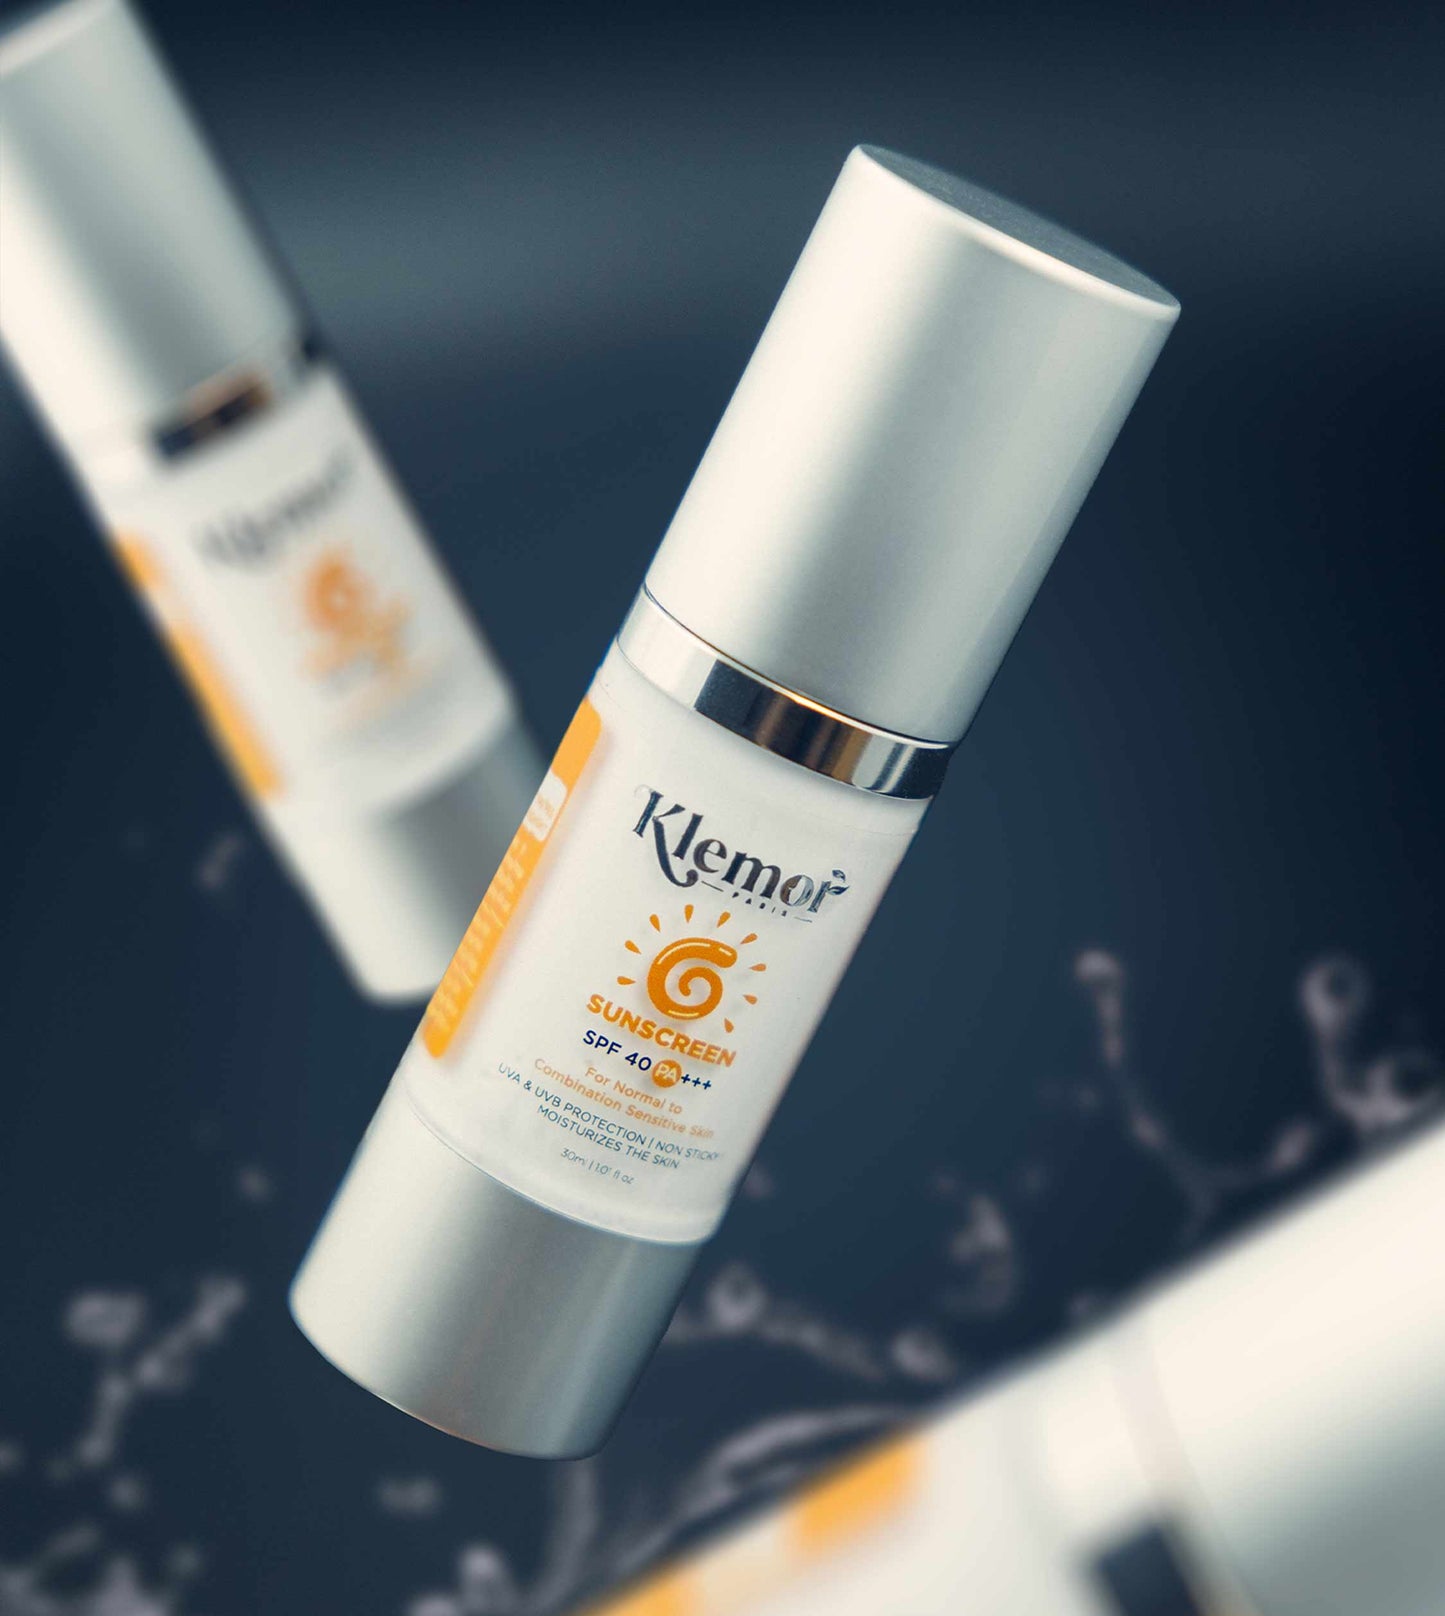 Klemor SunShield SPF 40: Feather-light, Non-Sticky, Rapid Absorption for All Skin Types